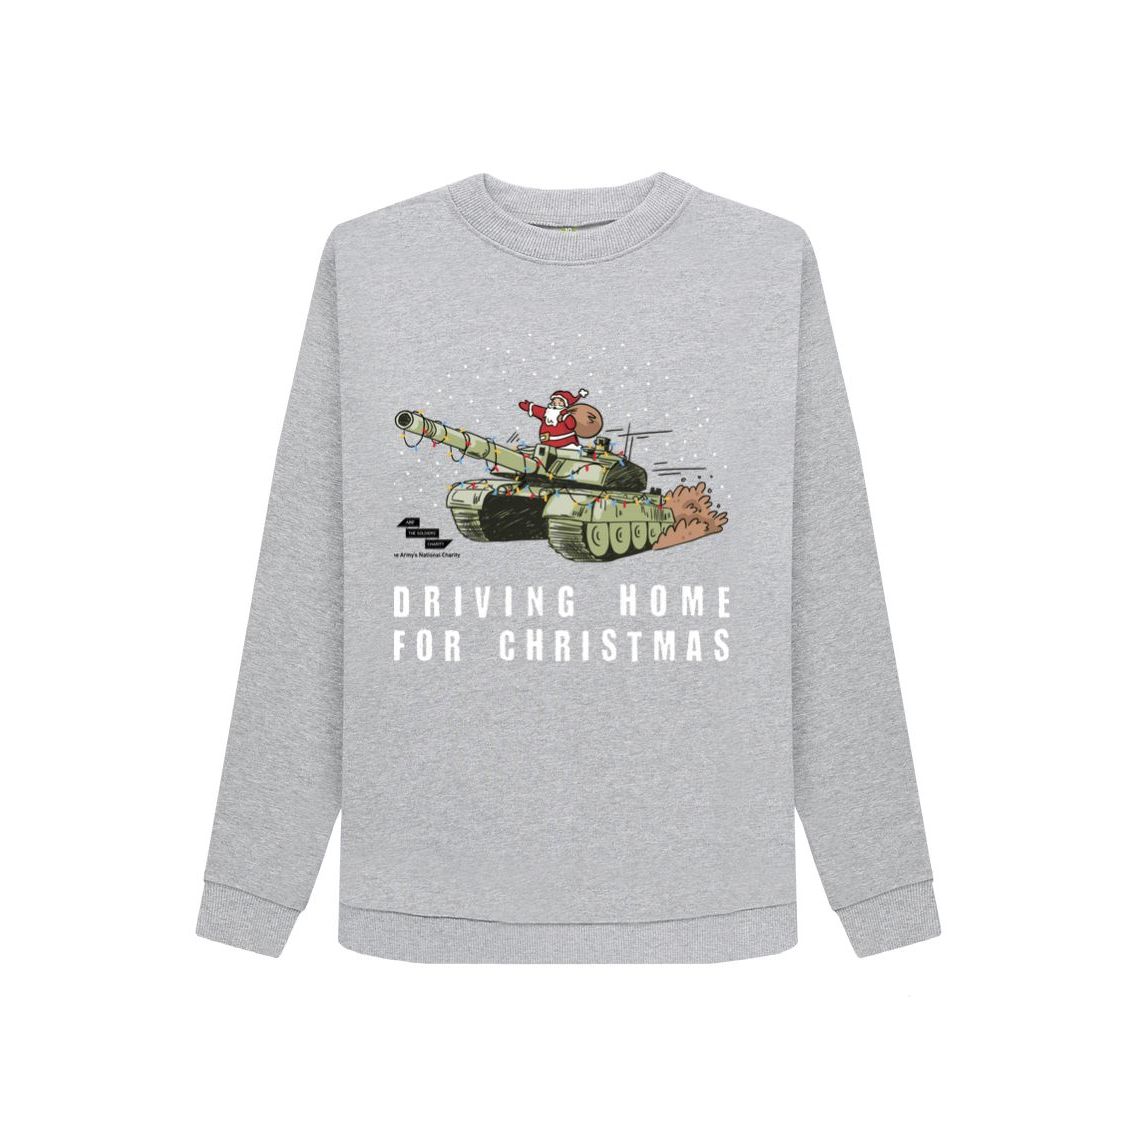 Women's fit "Driving home for Christmas" jumper - ABF The Soldiers' Charity Shop